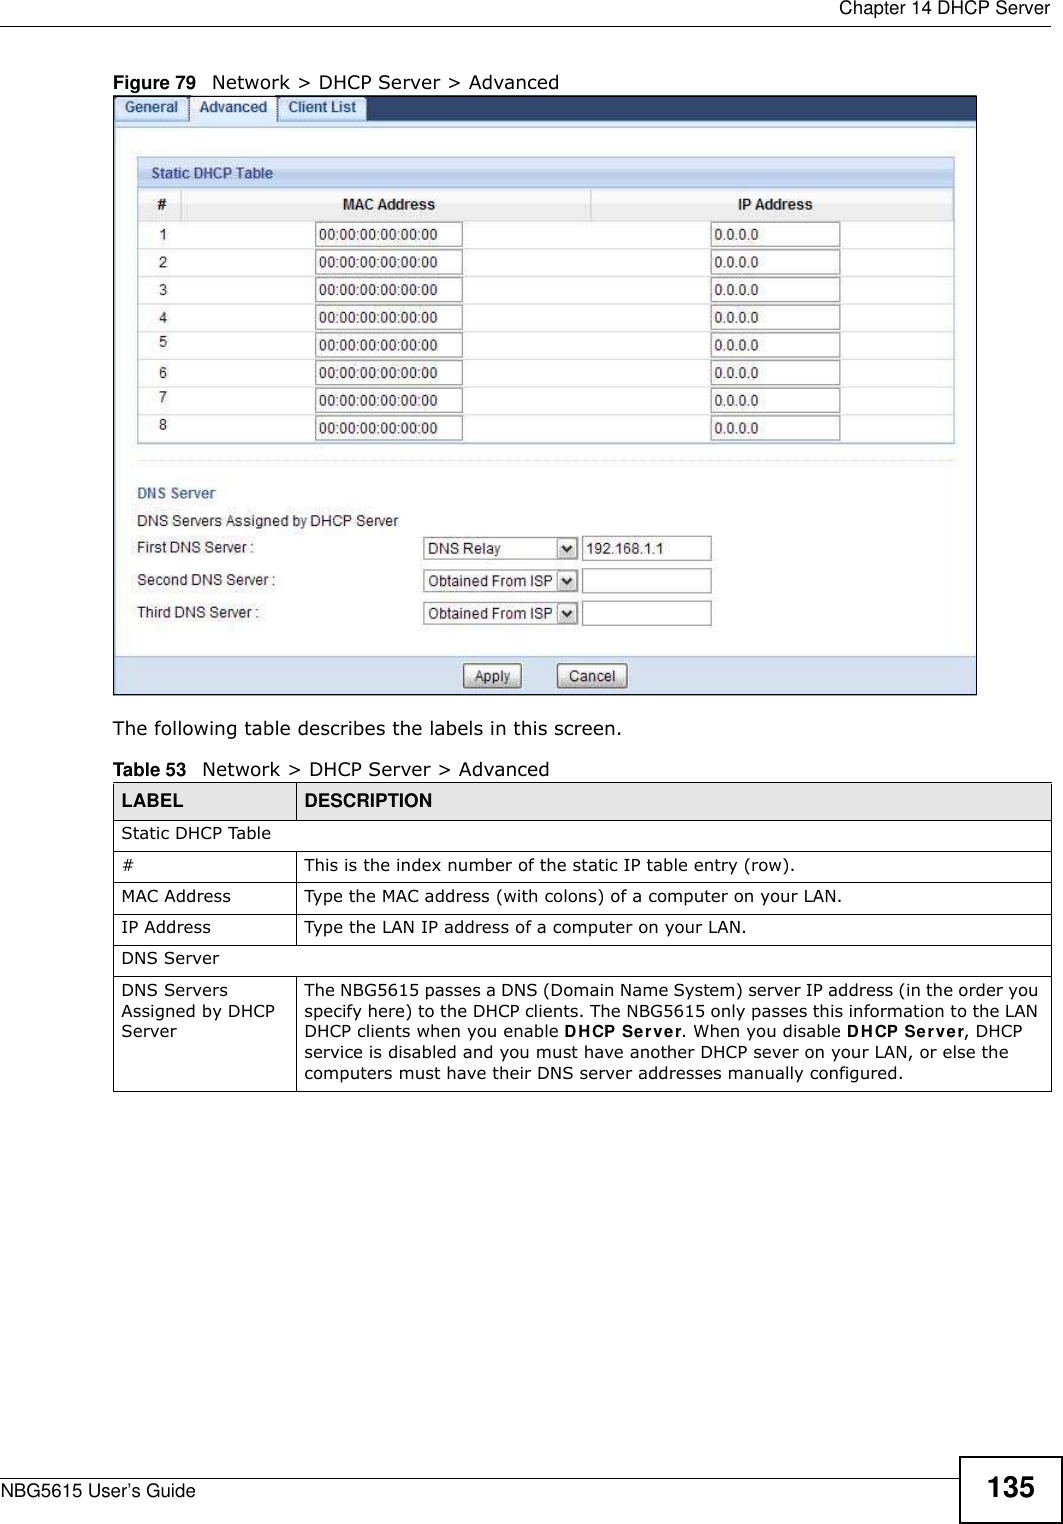  Chapter 14 DHCP ServerNBG5615 User’s Guide 135Figure 79   Network &gt; DHCP Server &gt; Advanced The following table describes the labels in this screen.Table 53   Network &gt; DHCP Server &gt; AdvancedLABEL DESCRIPTIONStatic DHCP Table# This is the index number of the static IP table entry (row).MAC Address Type the MAC address (with colons) of a computer on your LAN.IP Address Type the LAN IP address of a computer on your LAN.DNS ServerDNS Servers Assigned by DHCP Server The NBG5615 passes a DNS (Domain Name System) server IP address (in the order you specify here) to the DHCP clients. The NBG5615 only passes this information to the LAN DHCP clients when you enable DHCP Server. When you disable DHCP Server, DHCP service is disabled and you must have another DHCP sever on your LAN, or else the computers must have their DNS server addresses manually configured.